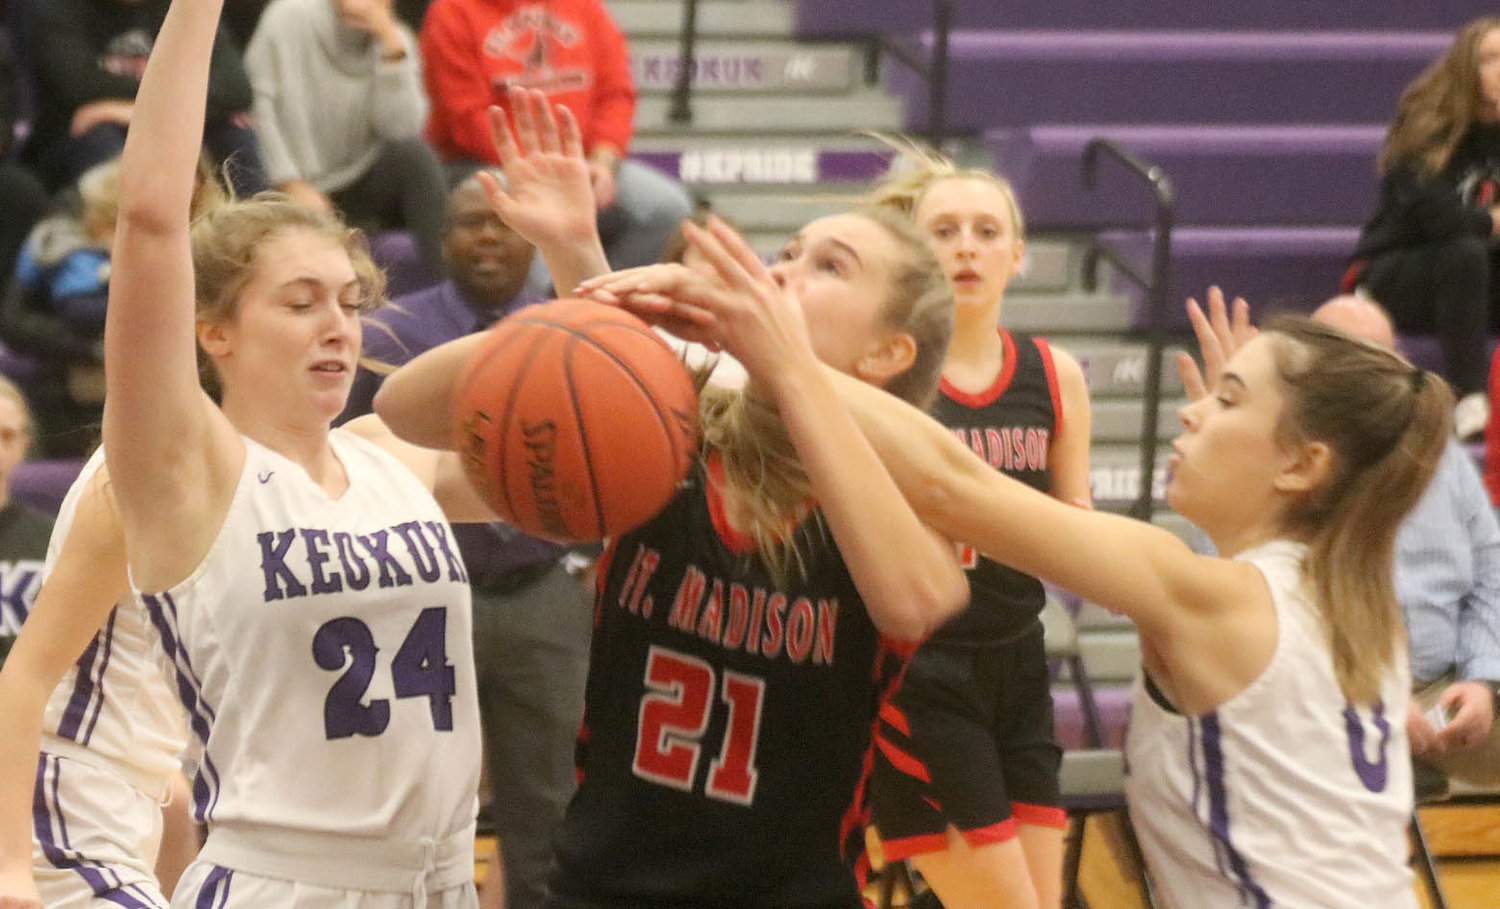 Fort Madison's Camille Kruse gets mugged trying to score in the lane in the first quarter Friday night in Keokuk. The Hounds fell 50-46. Photo by Chuck Vandenberg/PCC